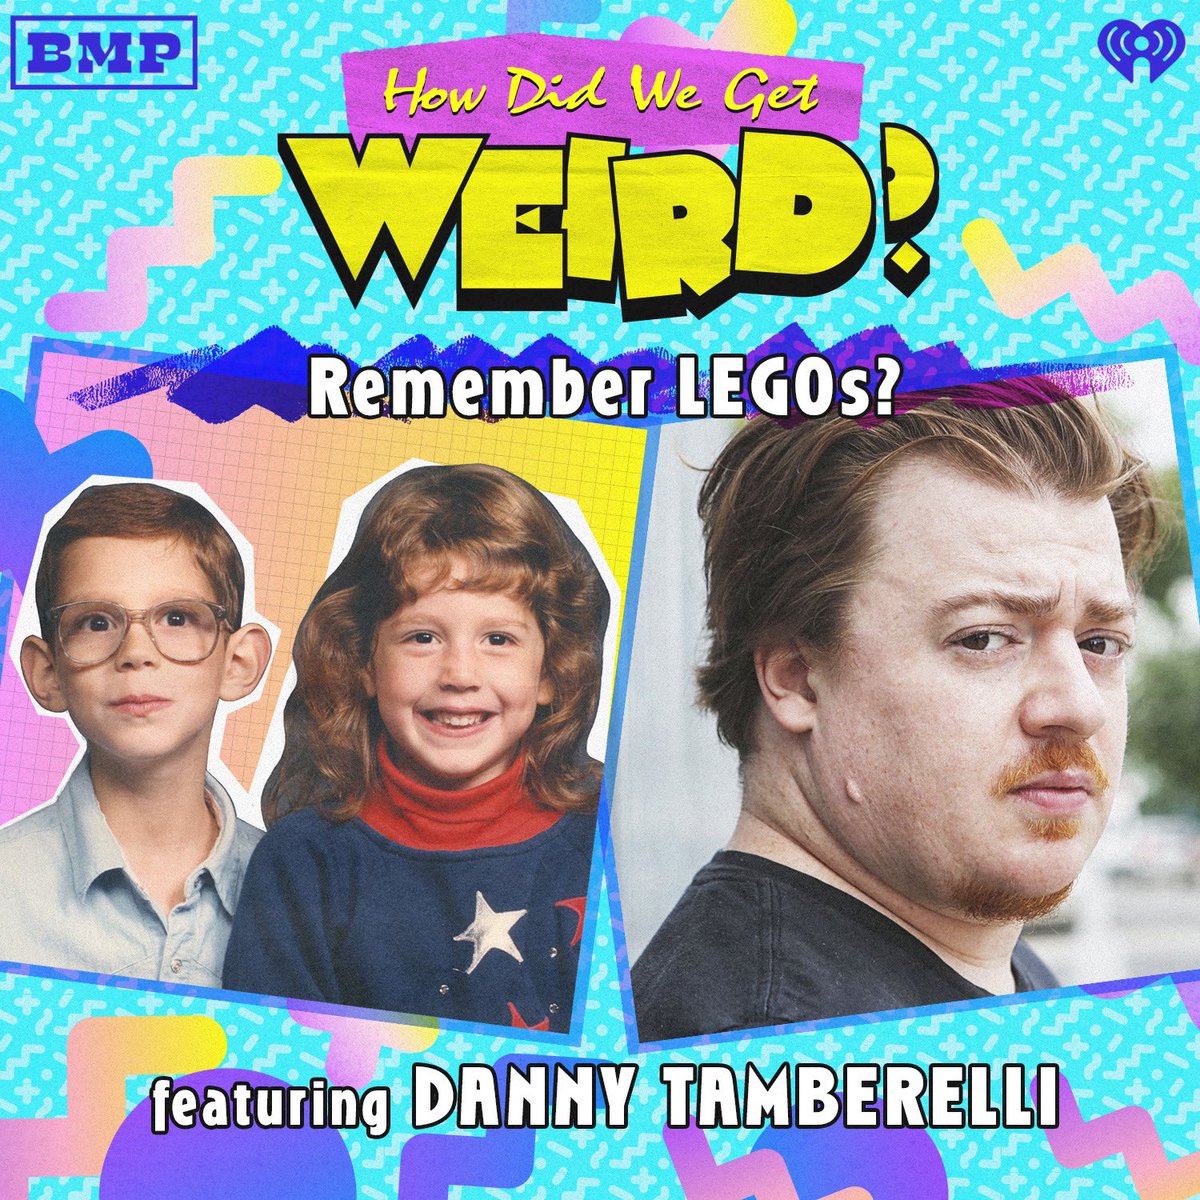 On today’s new HDWGW @jonahmbayer and I are thrilled to welcome the delightful @dtamberelli !! You may know him as Little Pete from the Nick show, but did you know he loves LEGOs, is in a punk rock band, and has agreed to do a former Nick actors jam in my backyard? A must-listen!